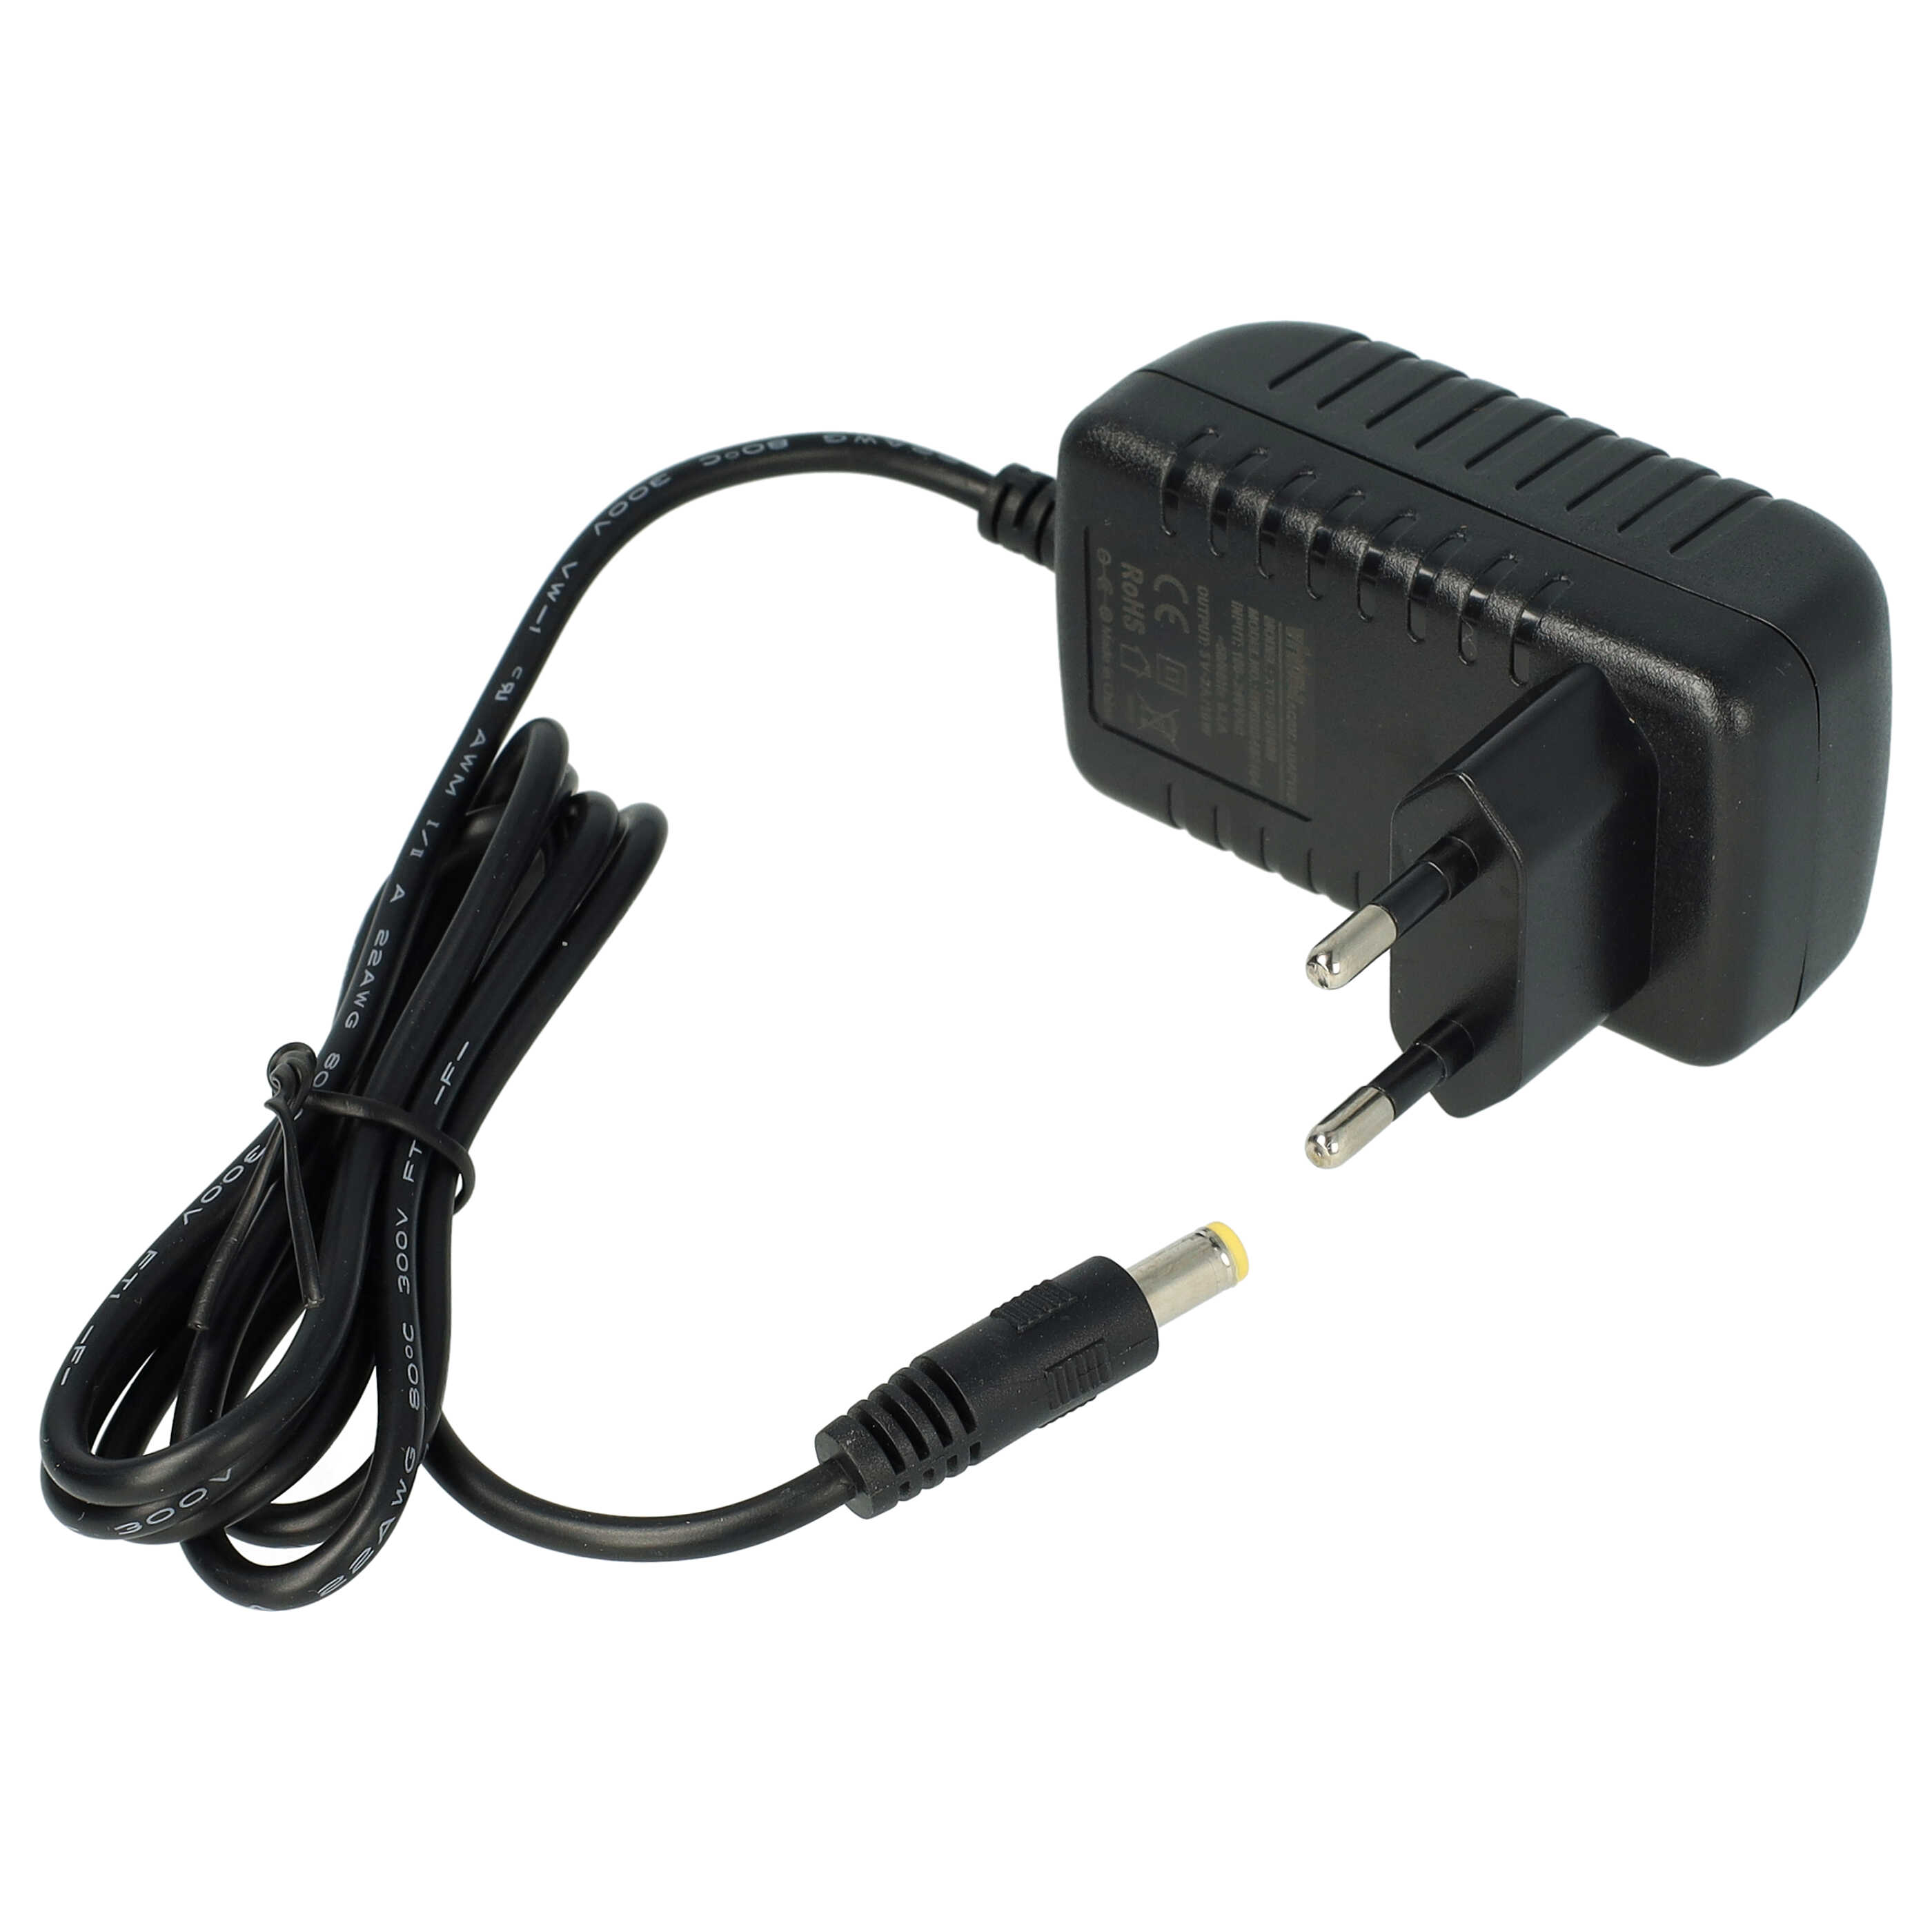 Mains Power Adapter with 5.5 x 2.5 mm Plug suitable for various Electric Devices - 5 V / 2 A